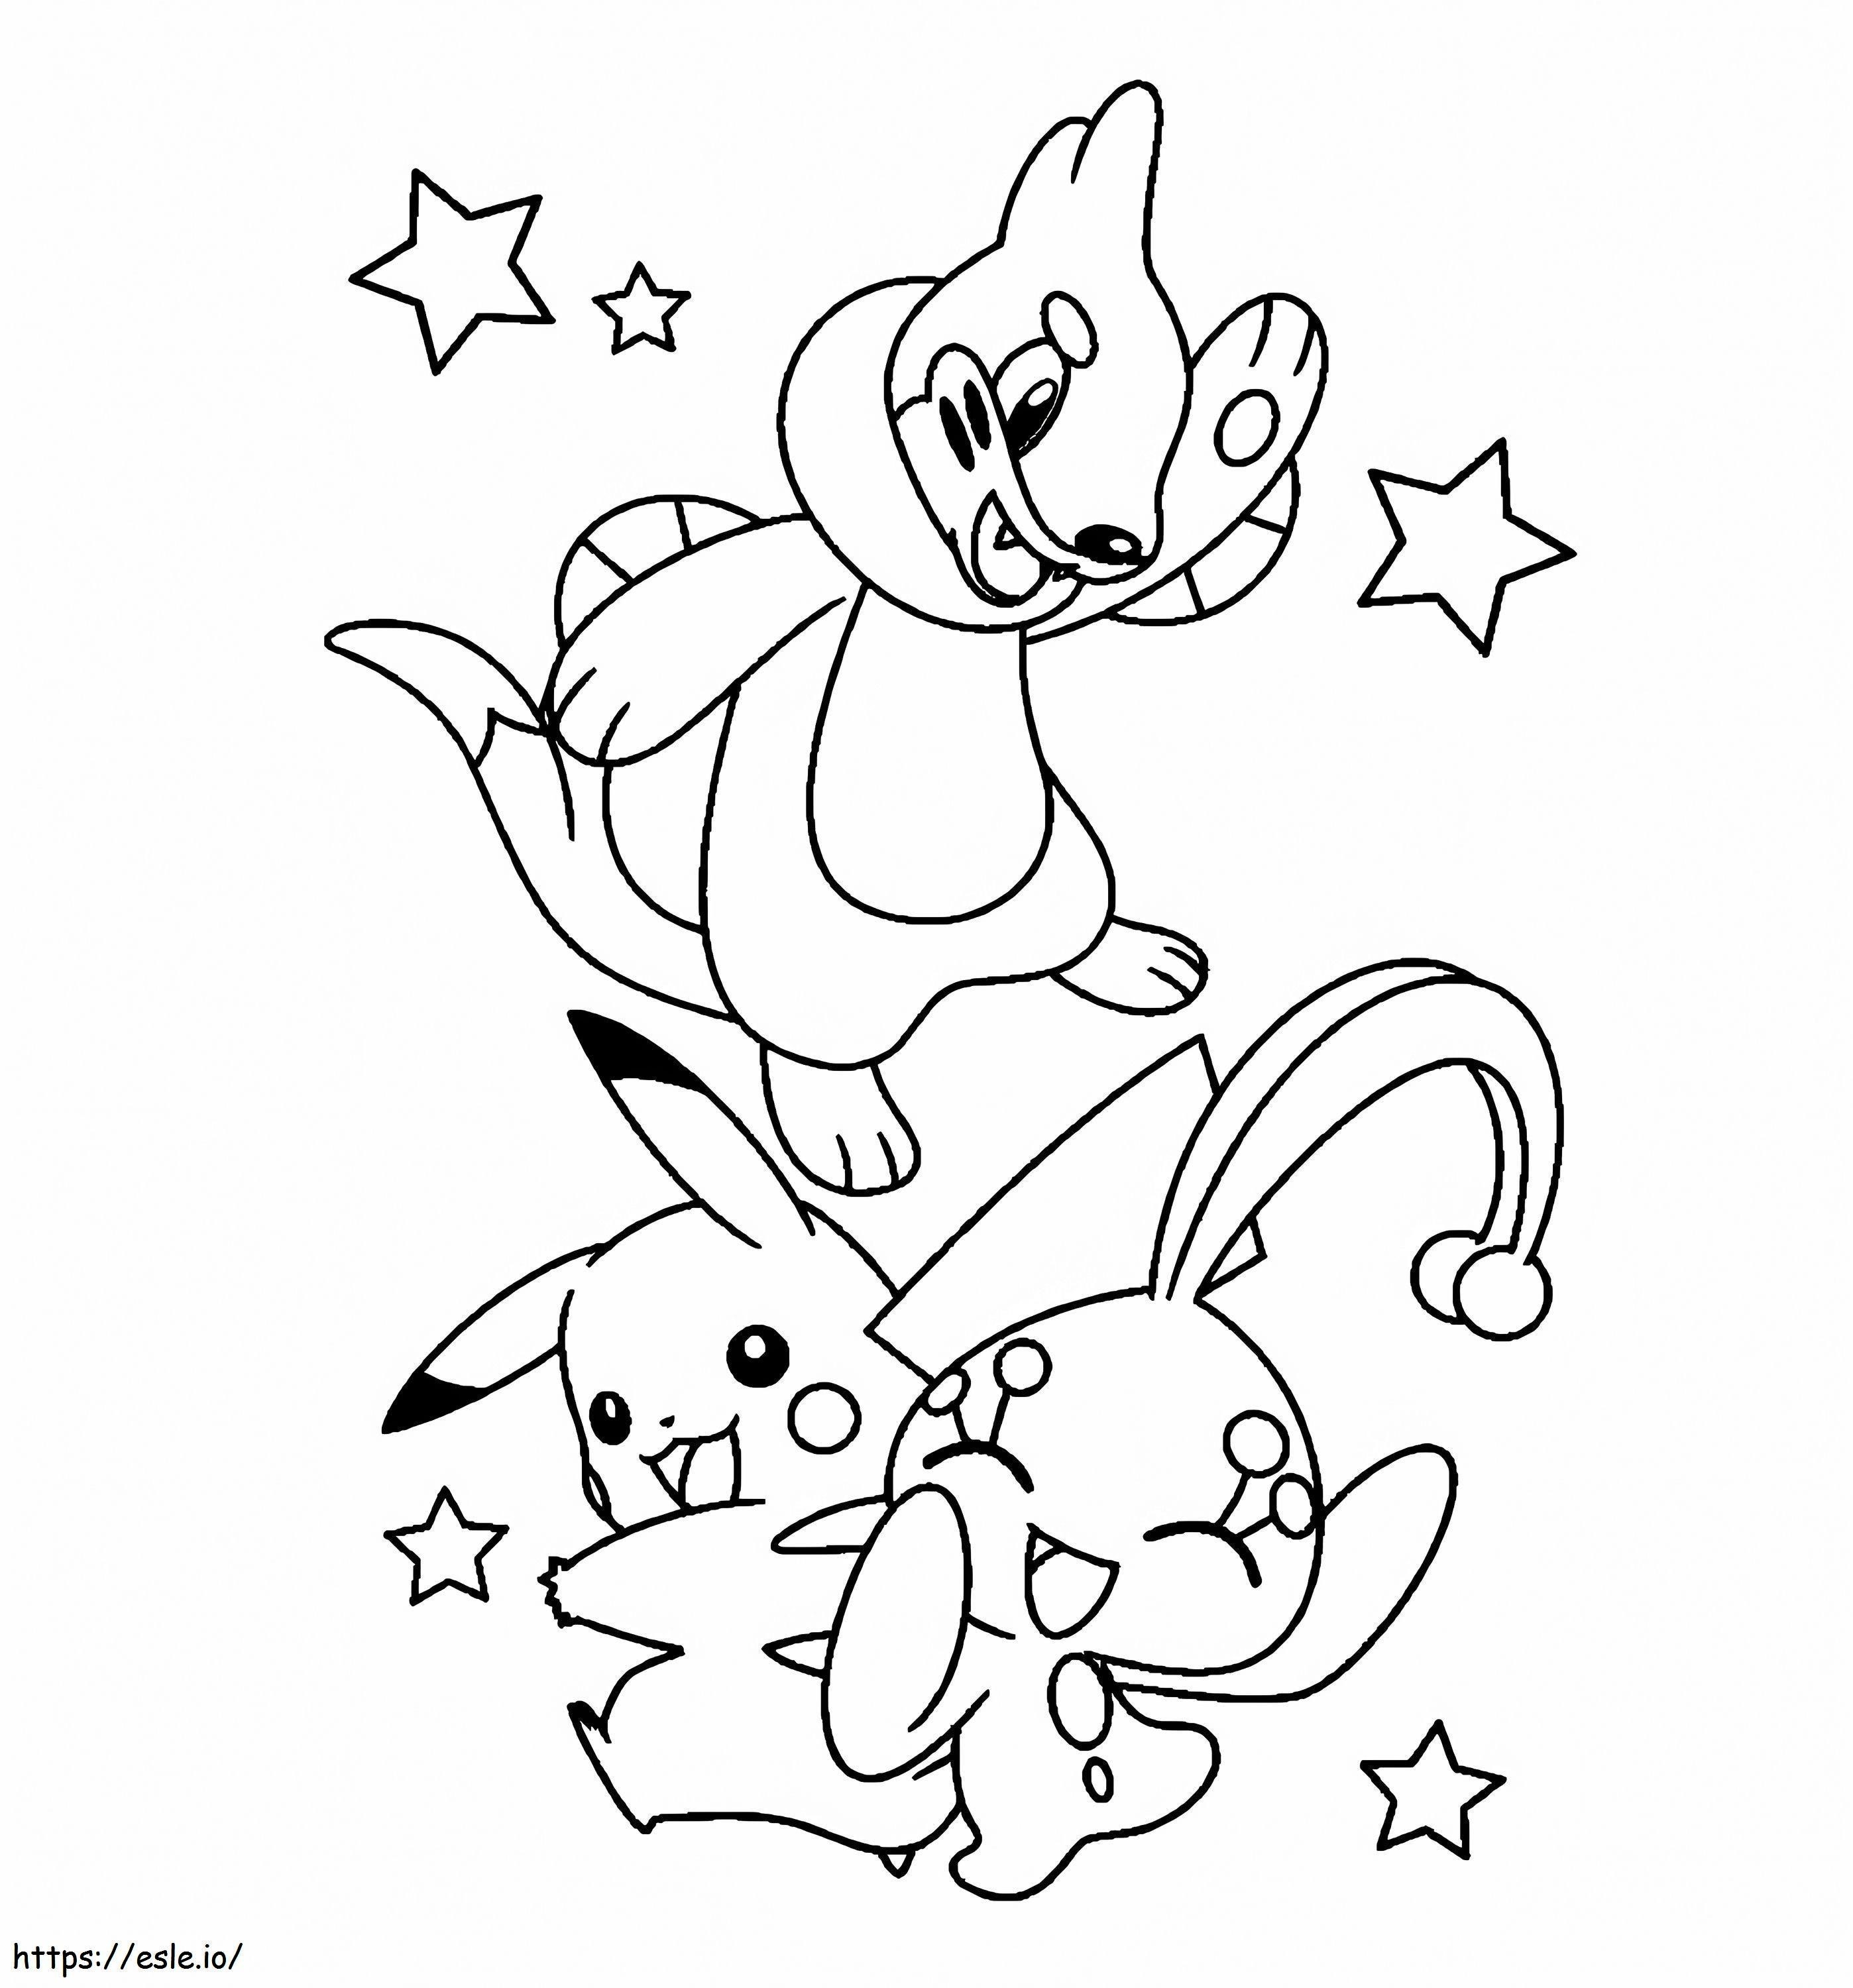 Buizel Pokemon 4 coloring page